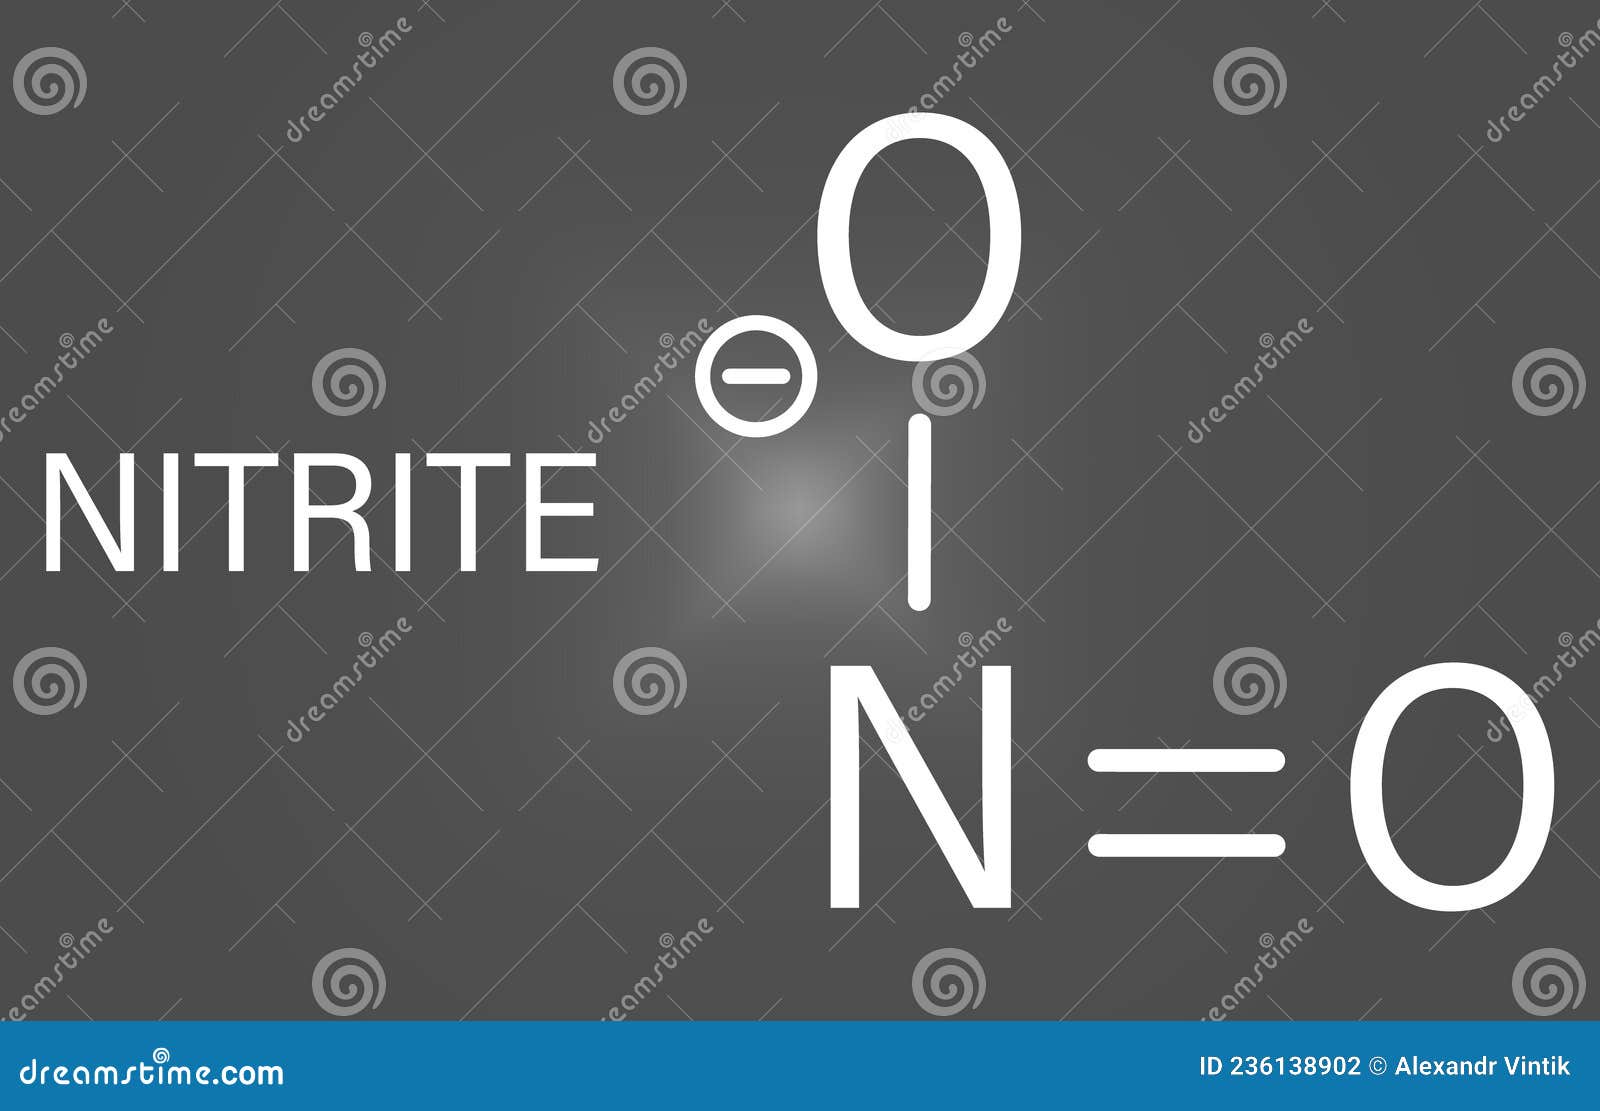 Nitrite Anion, Chemical Structure. Nitrite Salts are Used in the Curing ...